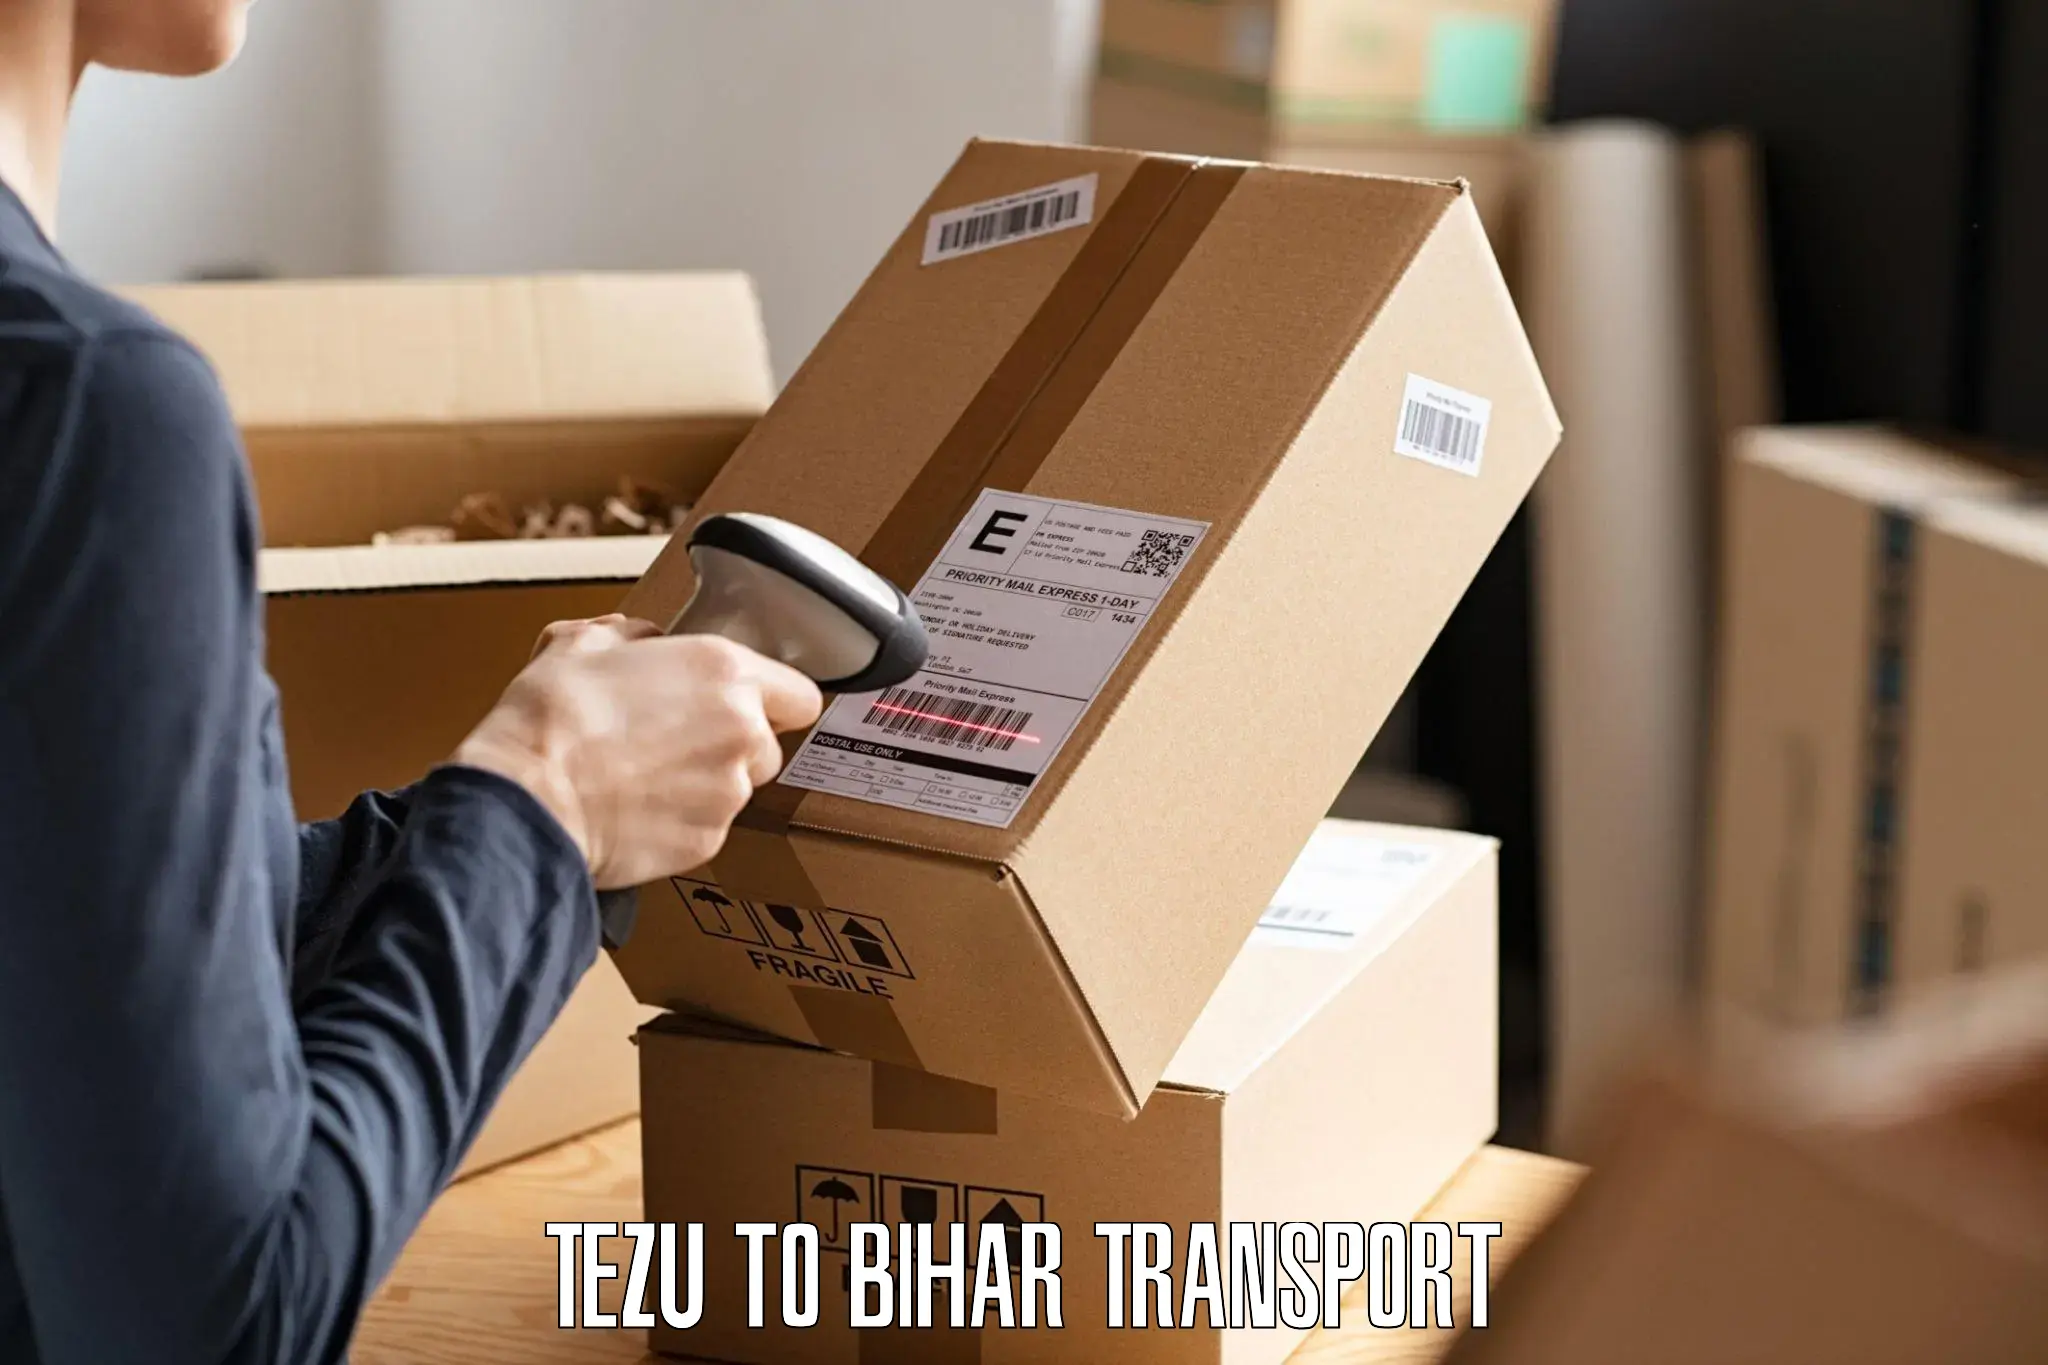 Container transport service Tezu to Sheonar